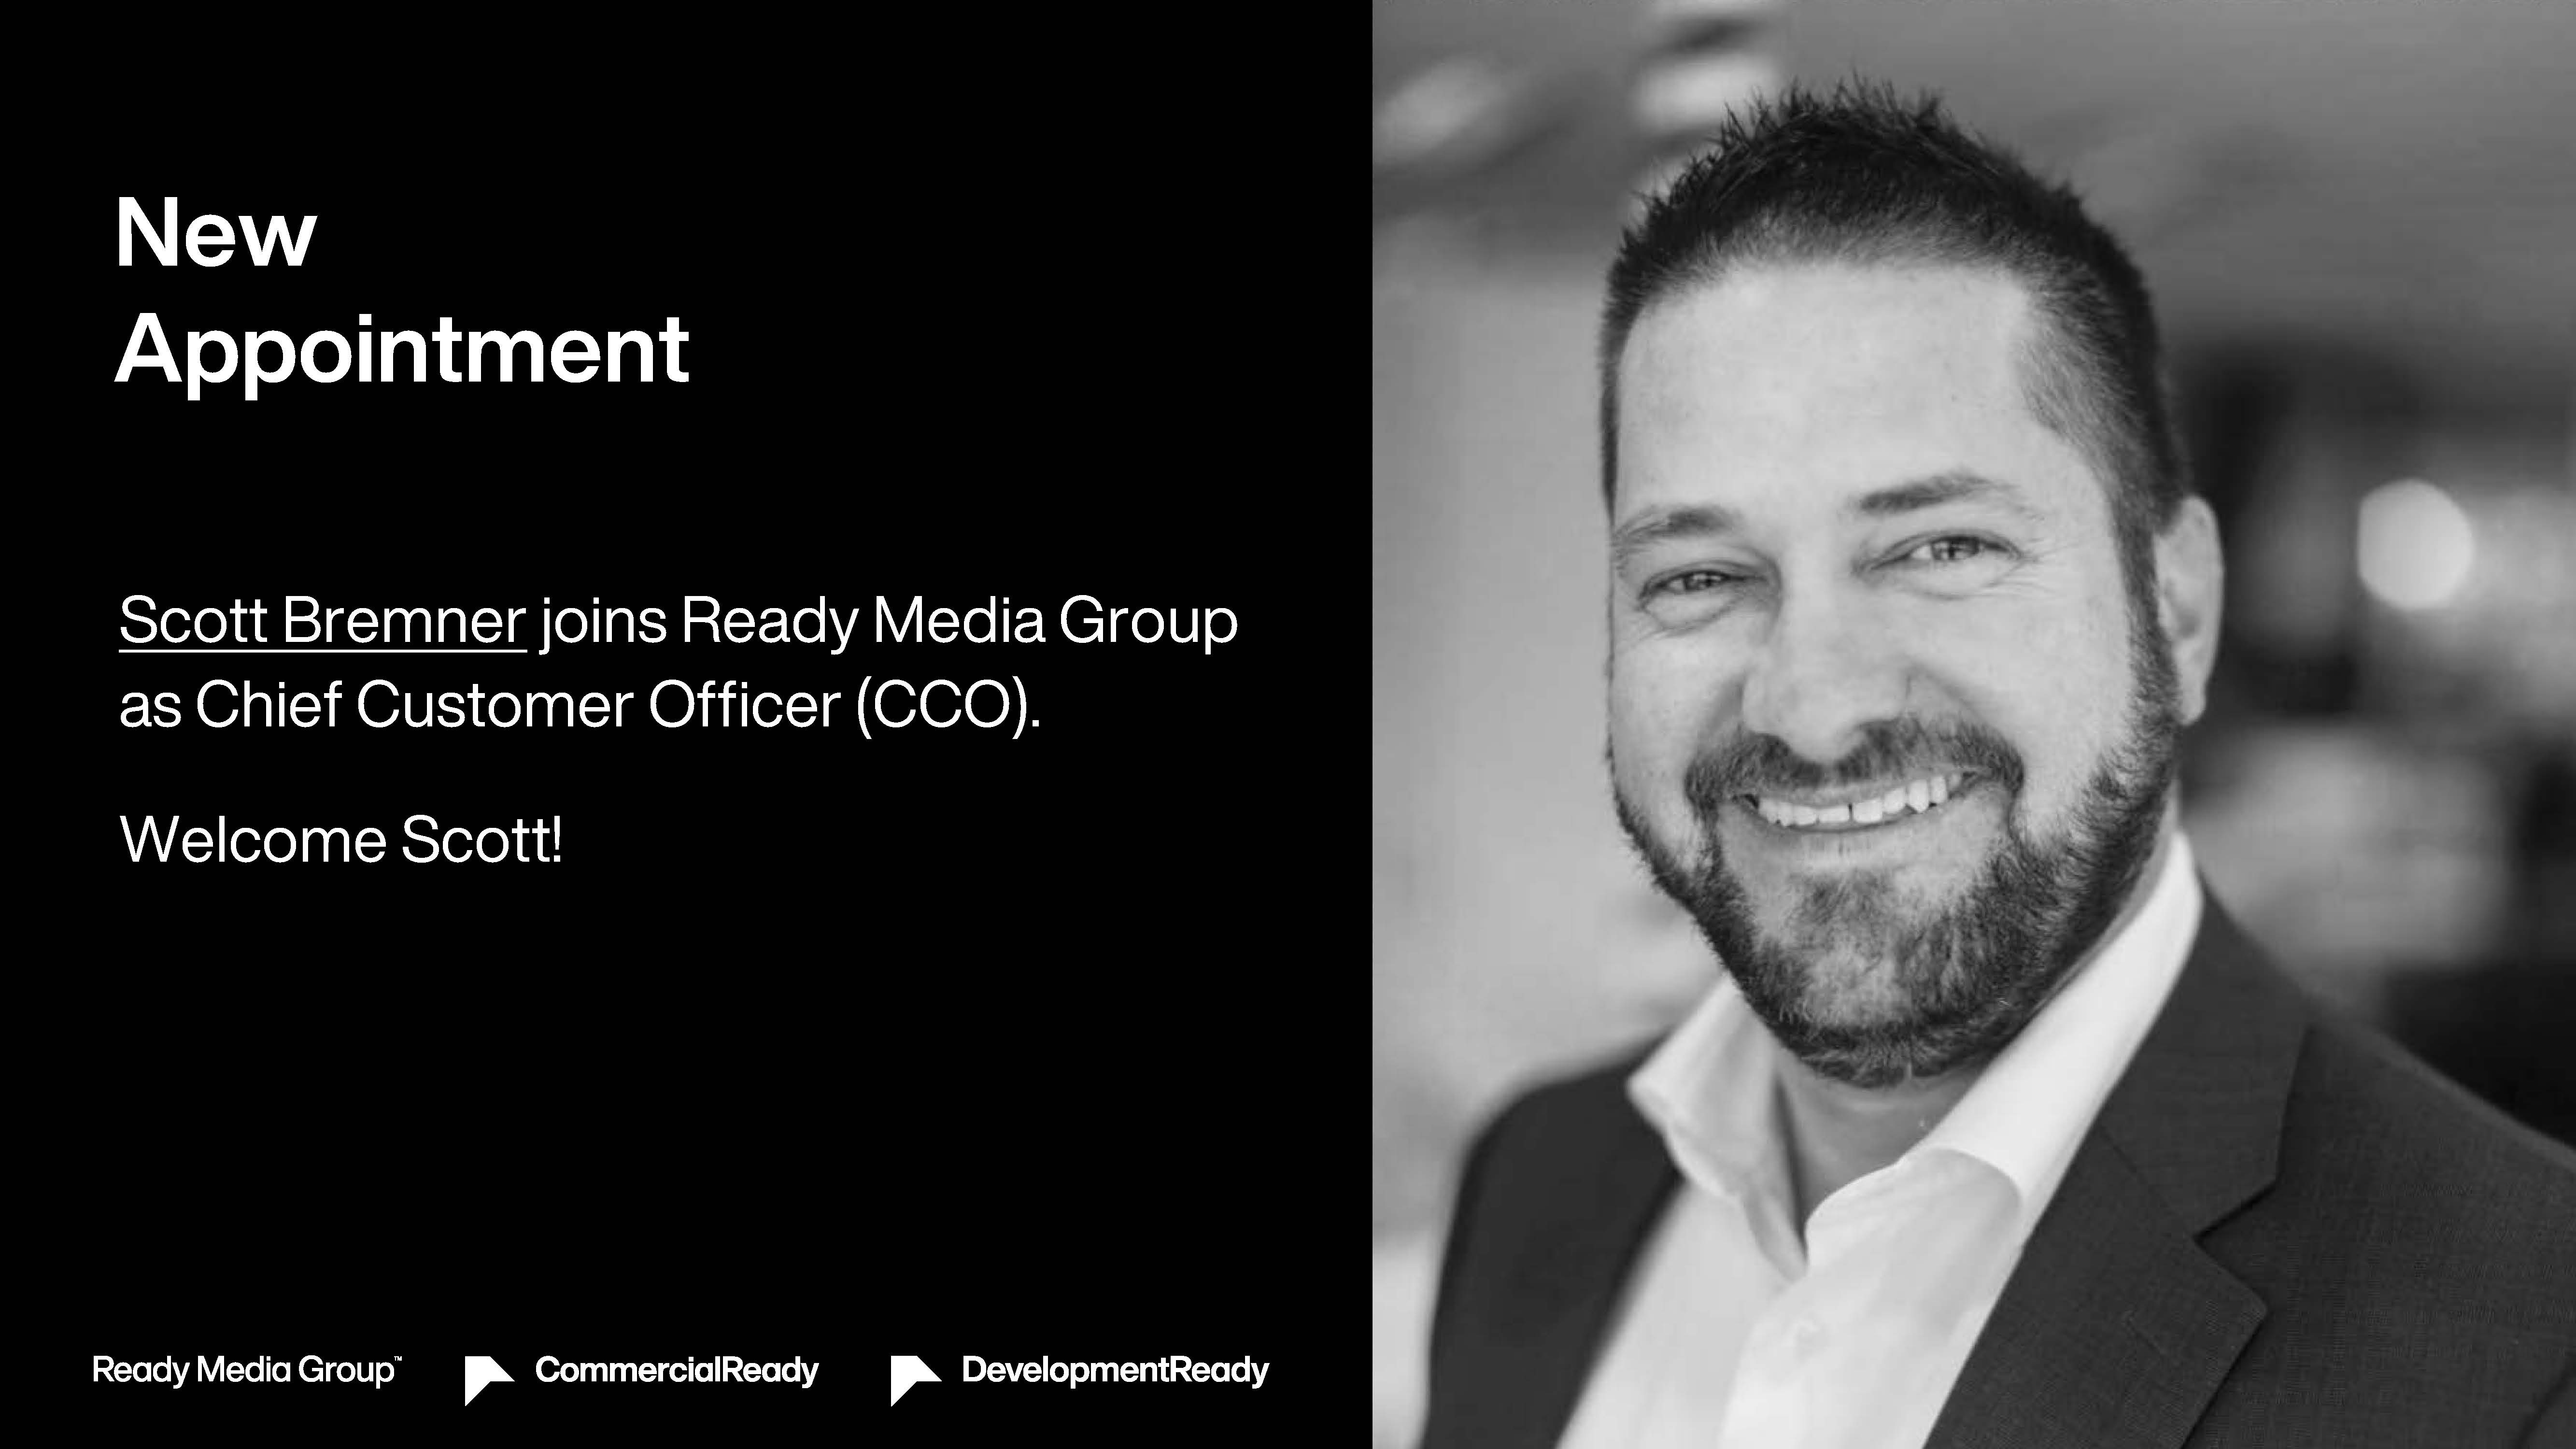 New appointment - Scott Bremner as Chief Customer Officer (CCO)